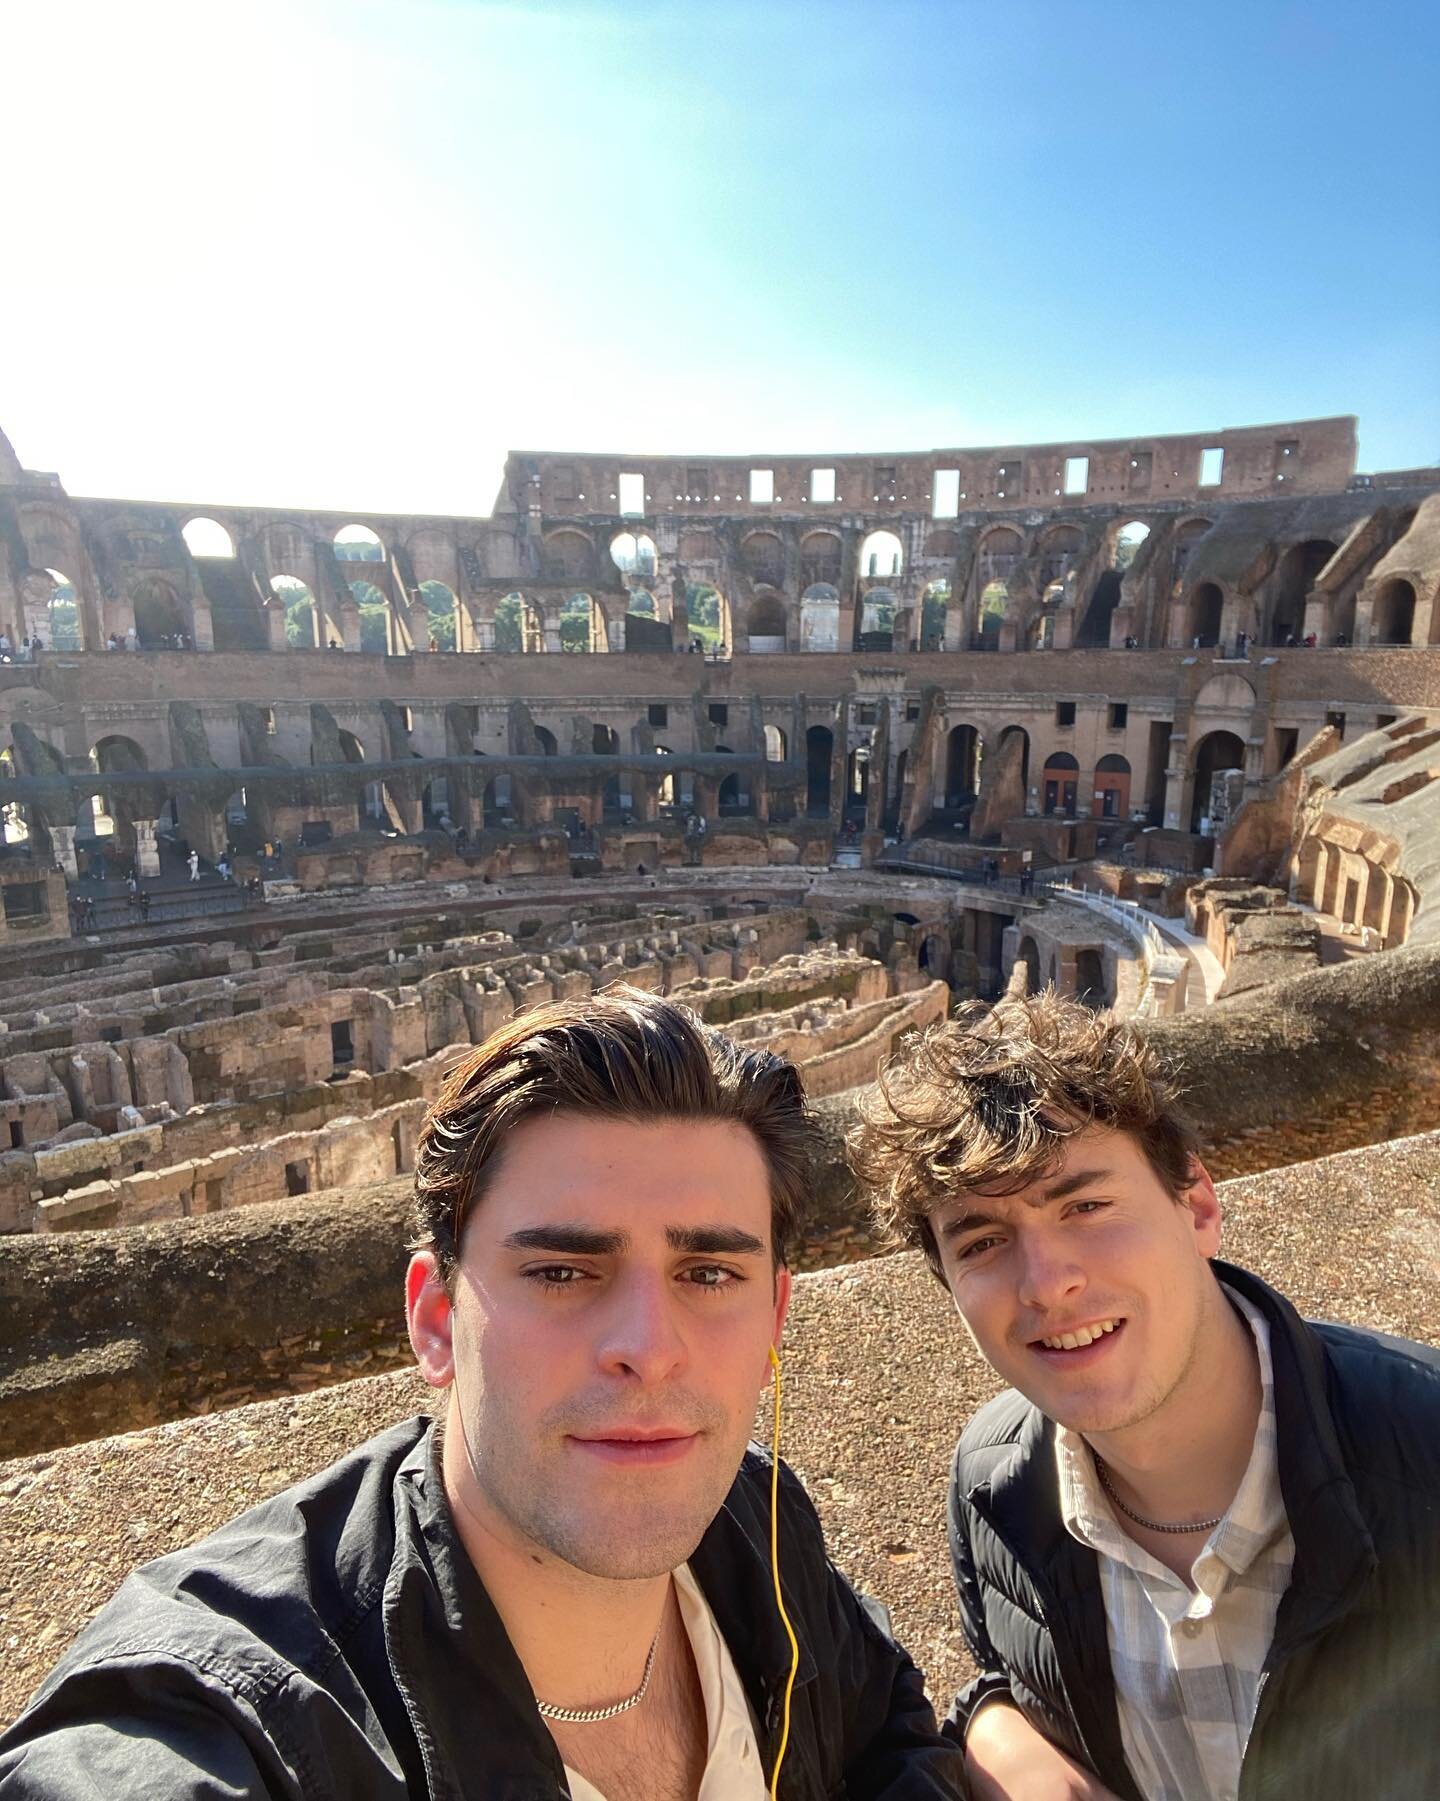 Did you know Phi Psi is global? Missing some of our boys who are currently studying abroad right now! JD, Chris, Jake, and Sean are killing it out there. Shoutout to one of our alumni Naji!!!

Comment your top tips for the lovely brothers abroad.